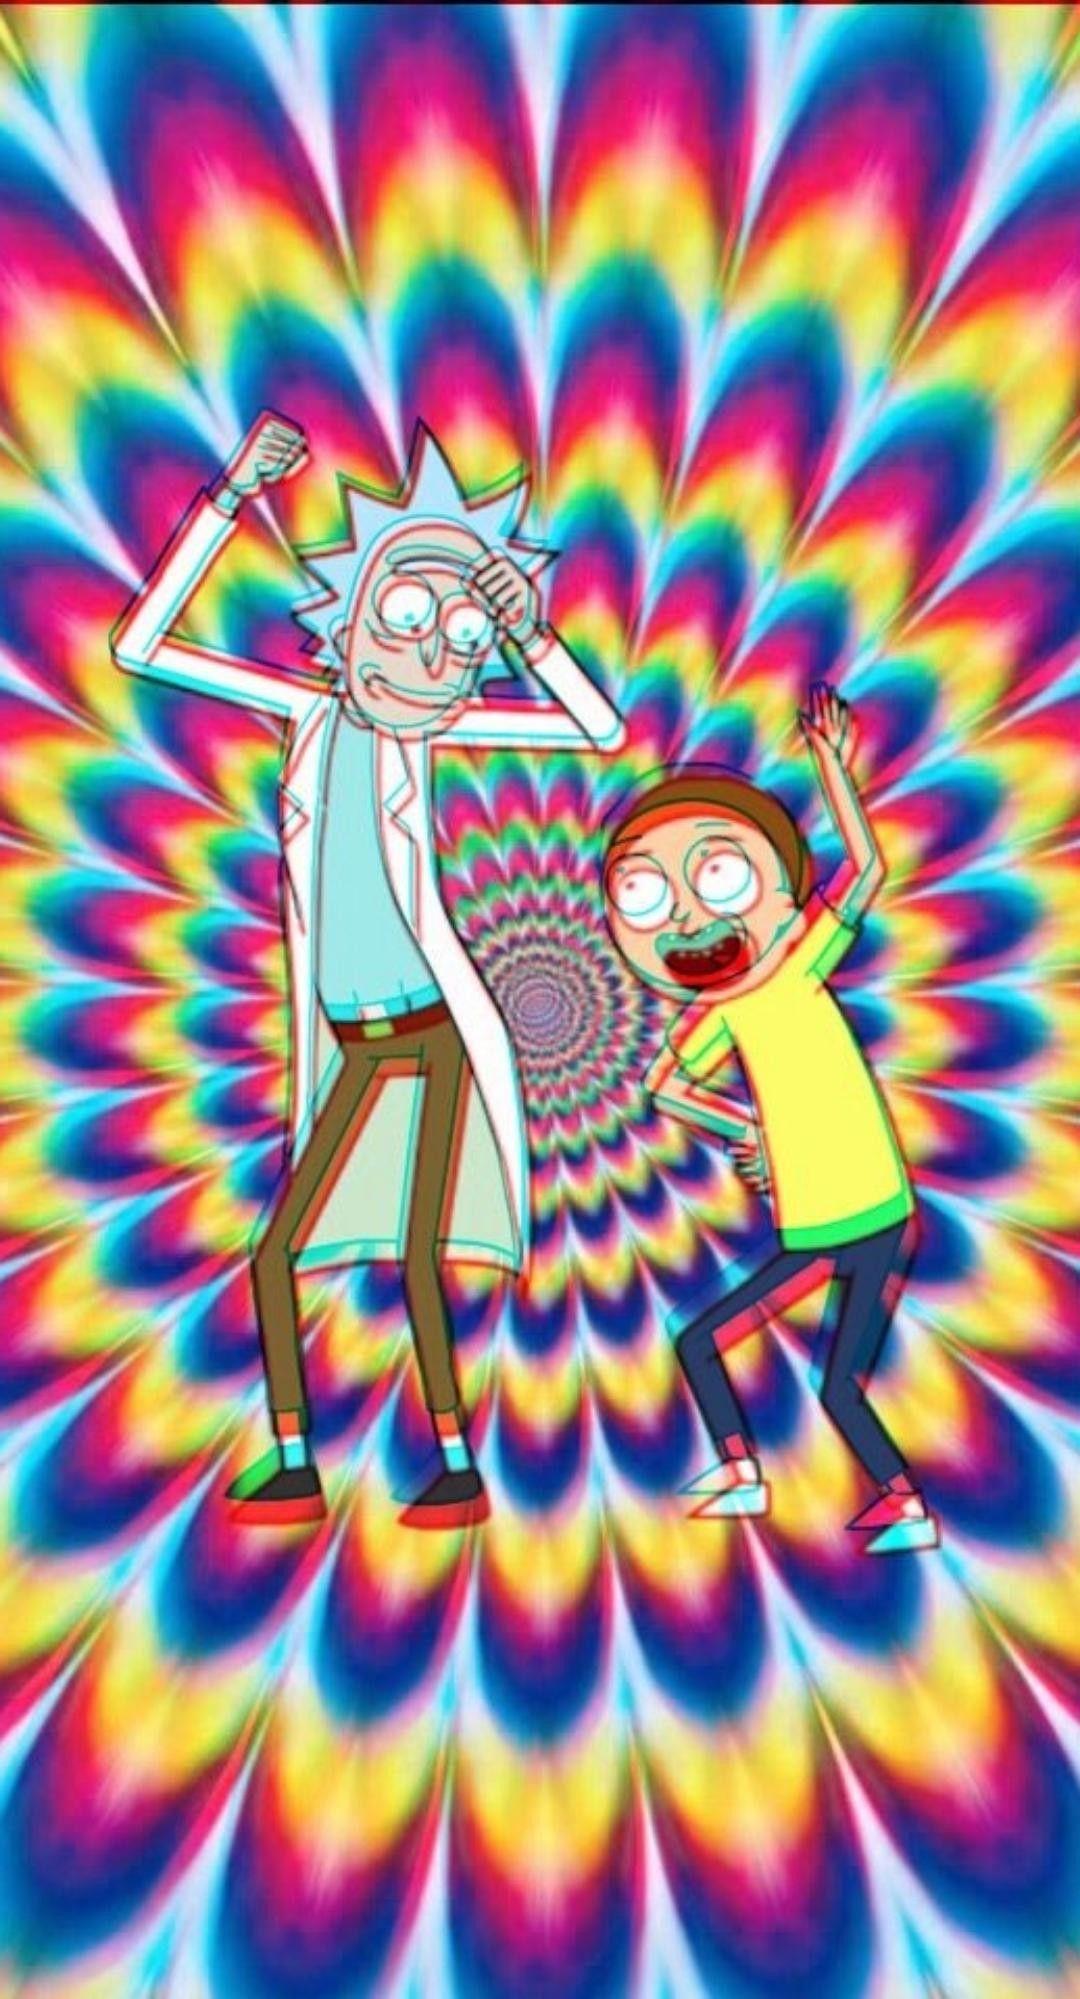 Rick and Morty Stoner Wallpapers - Top Free Rick and Morty Stoner